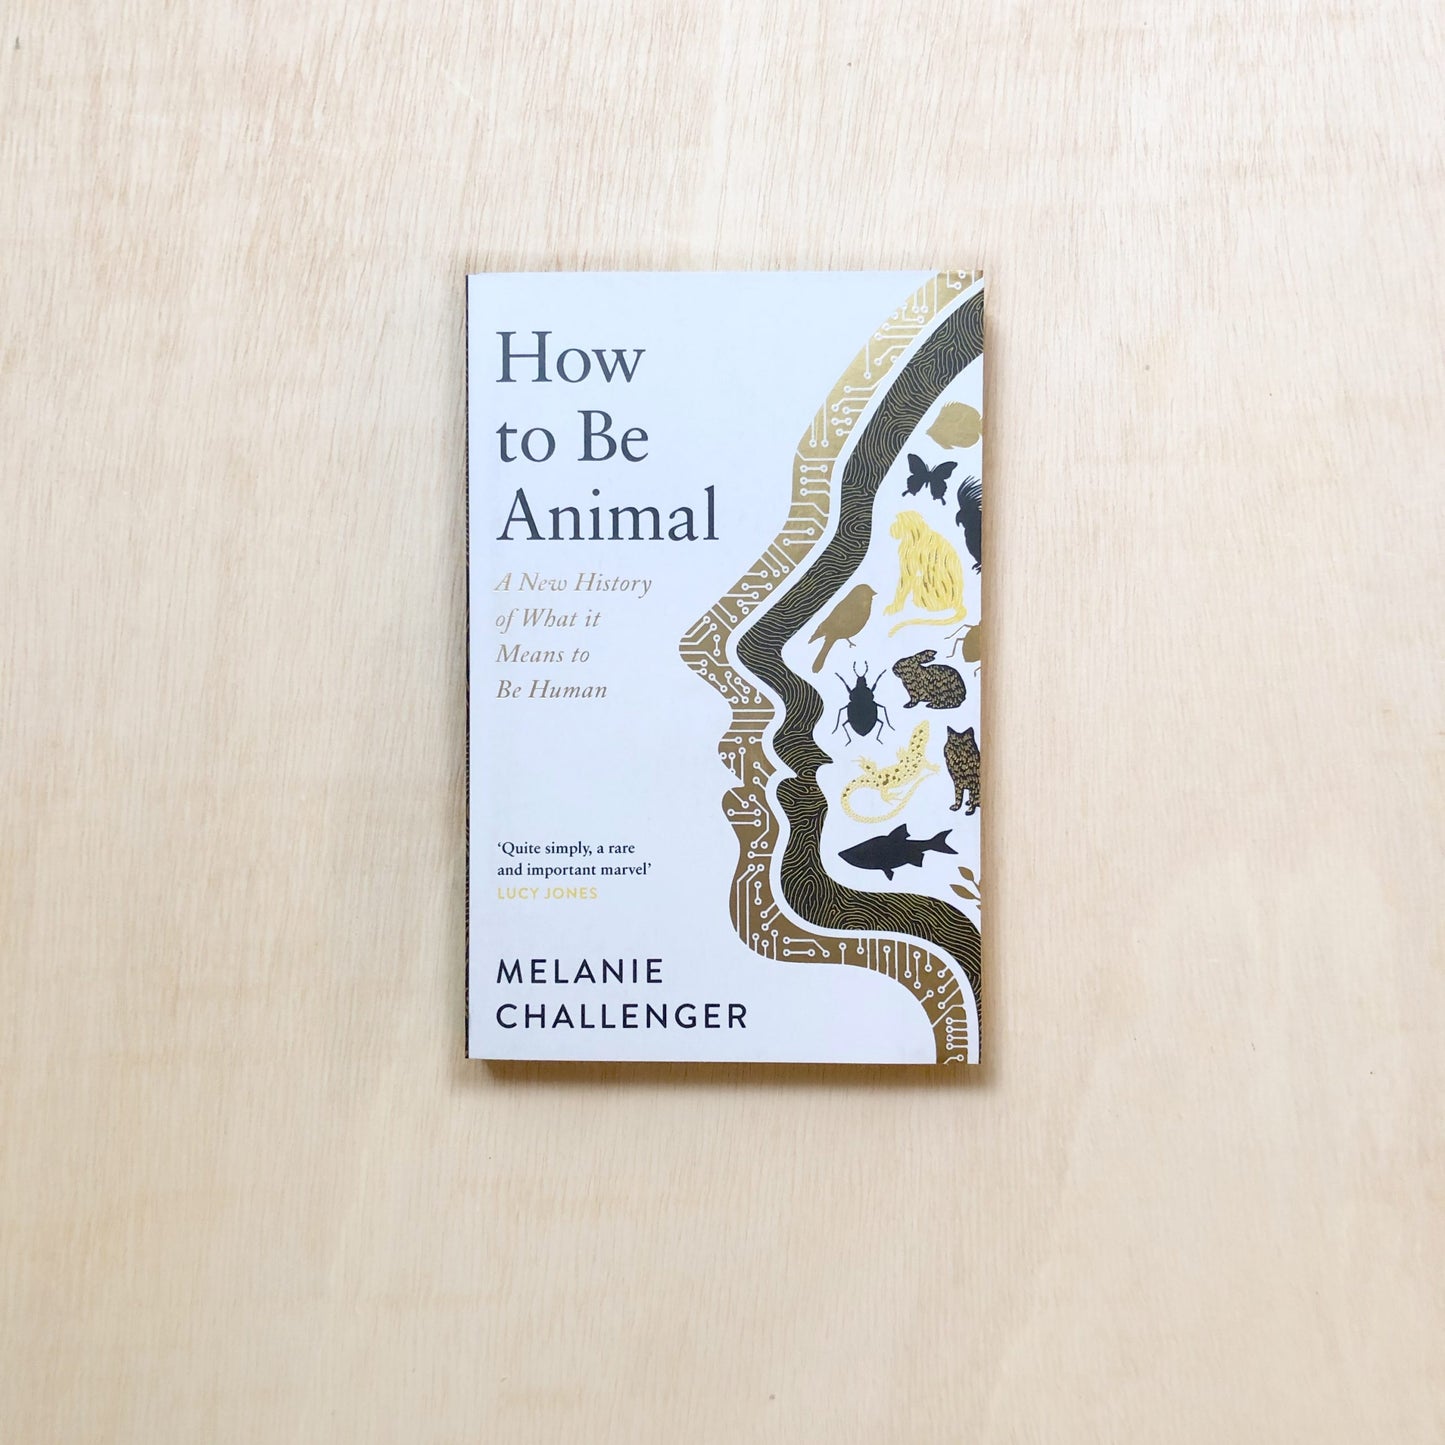 How to Be Animal - A New History of What it Means to Be Human